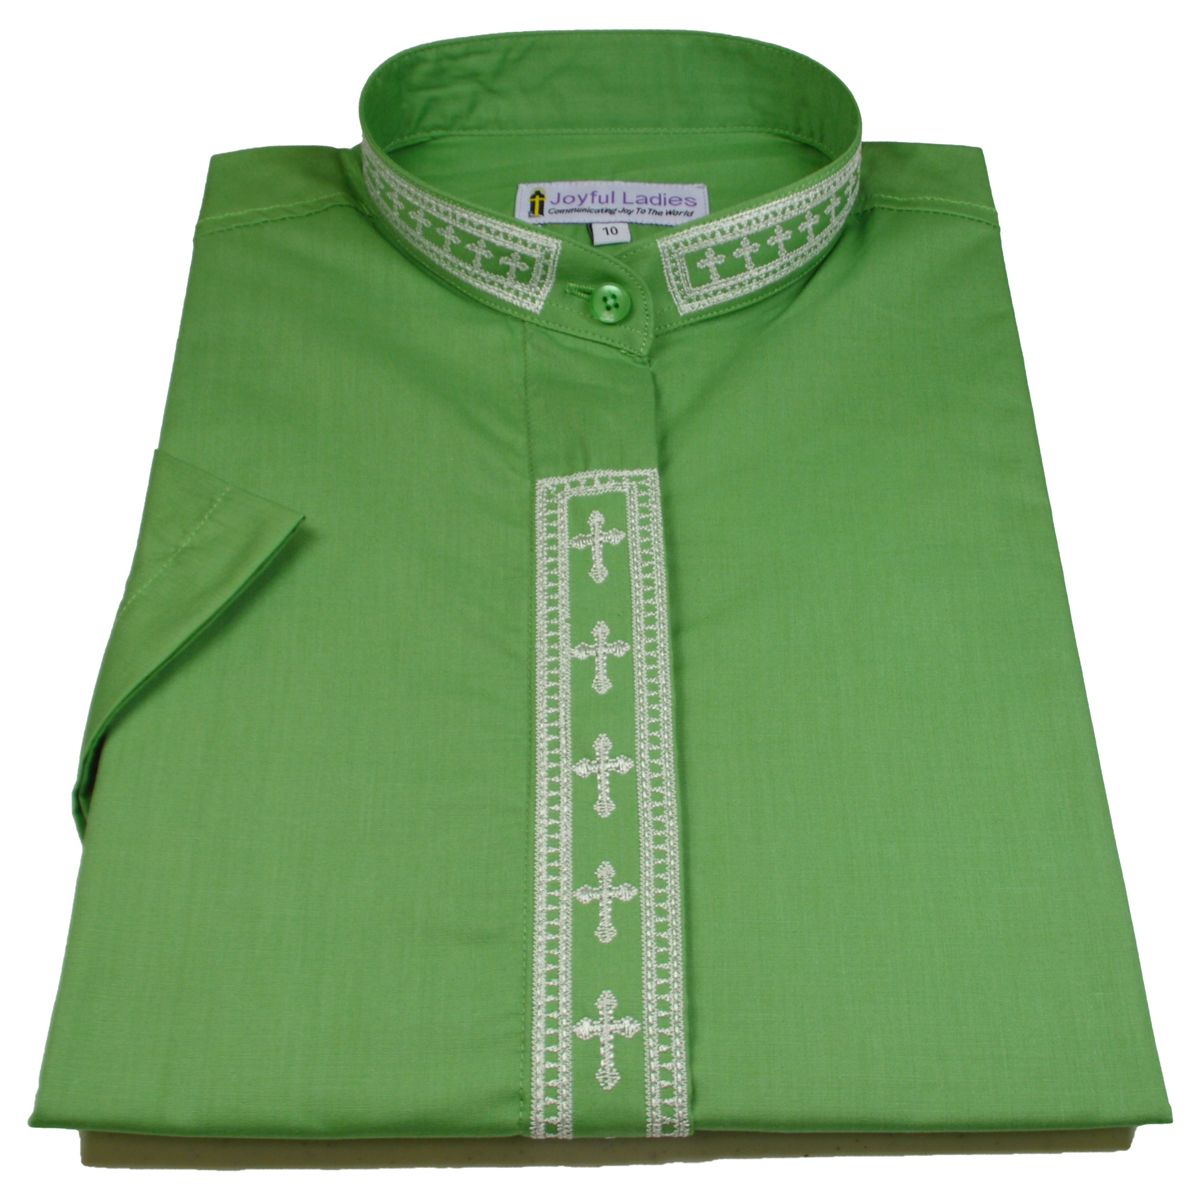 765. Women's Short-Sleeve Clergy Shirt With Fine Embroidery - Green/Creme